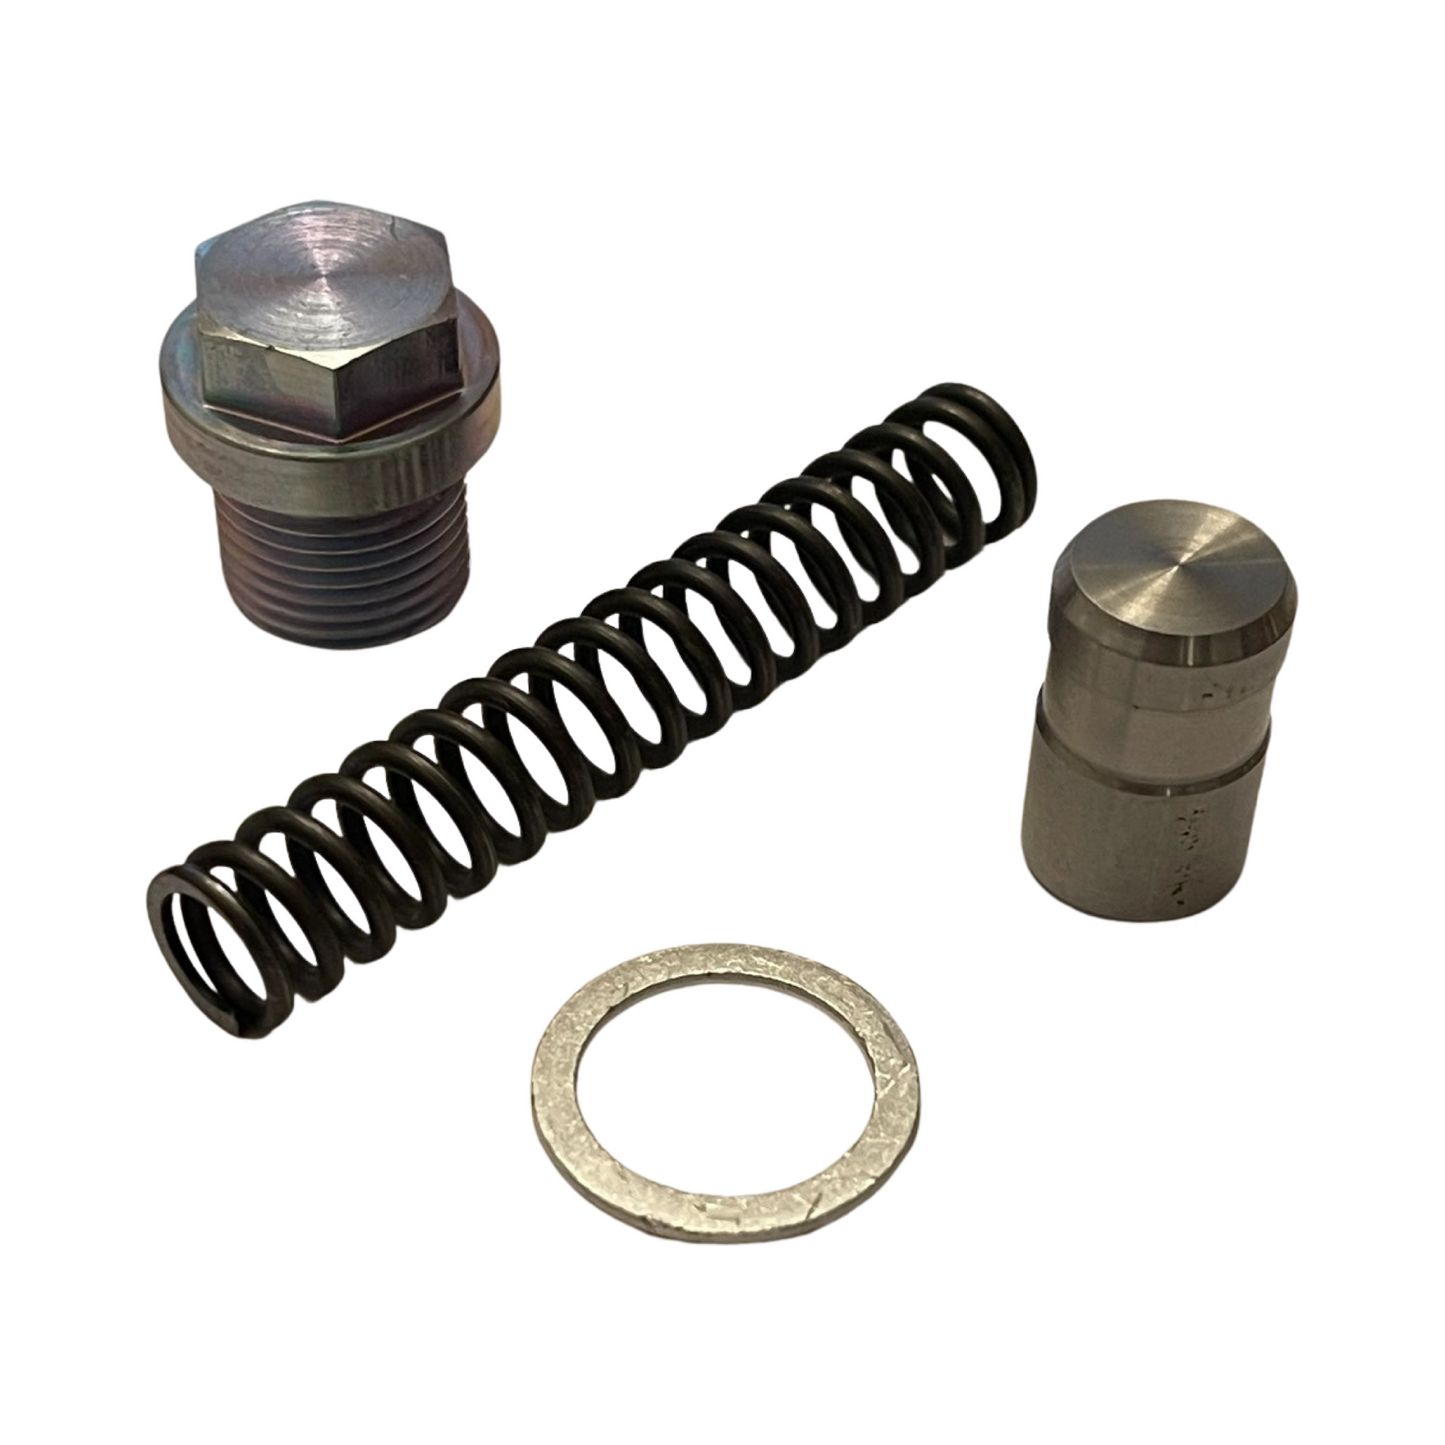 Oil Pressure Relief Valve Kit, 911 - Sierra Madre Collection